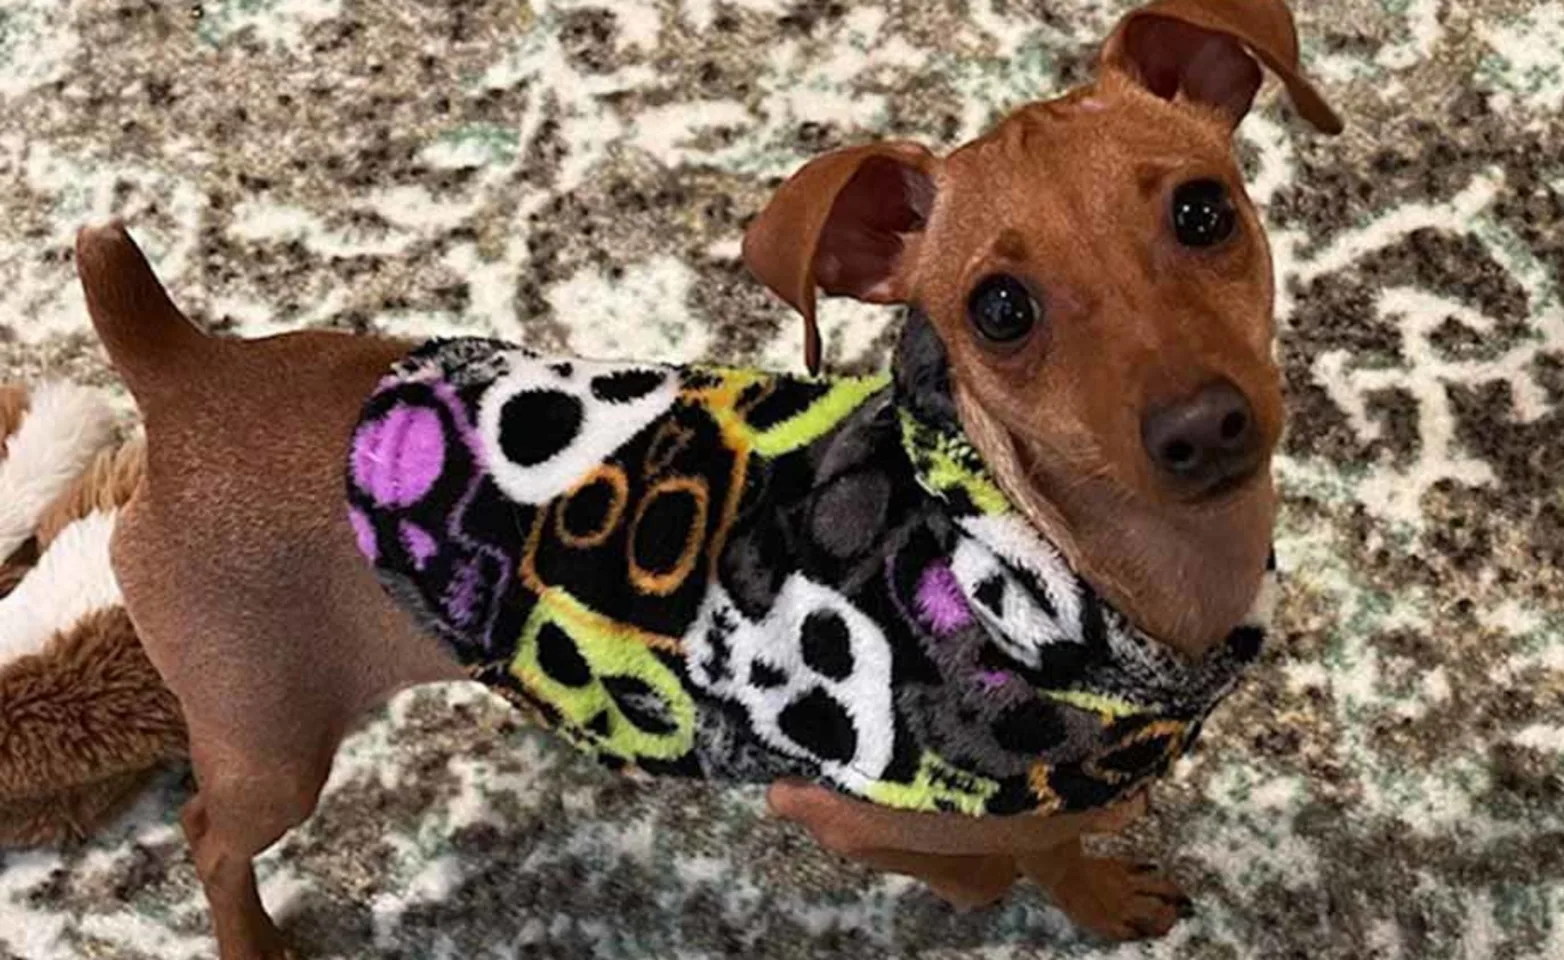 A small brown dog wearing a black sweater with colorful skulls